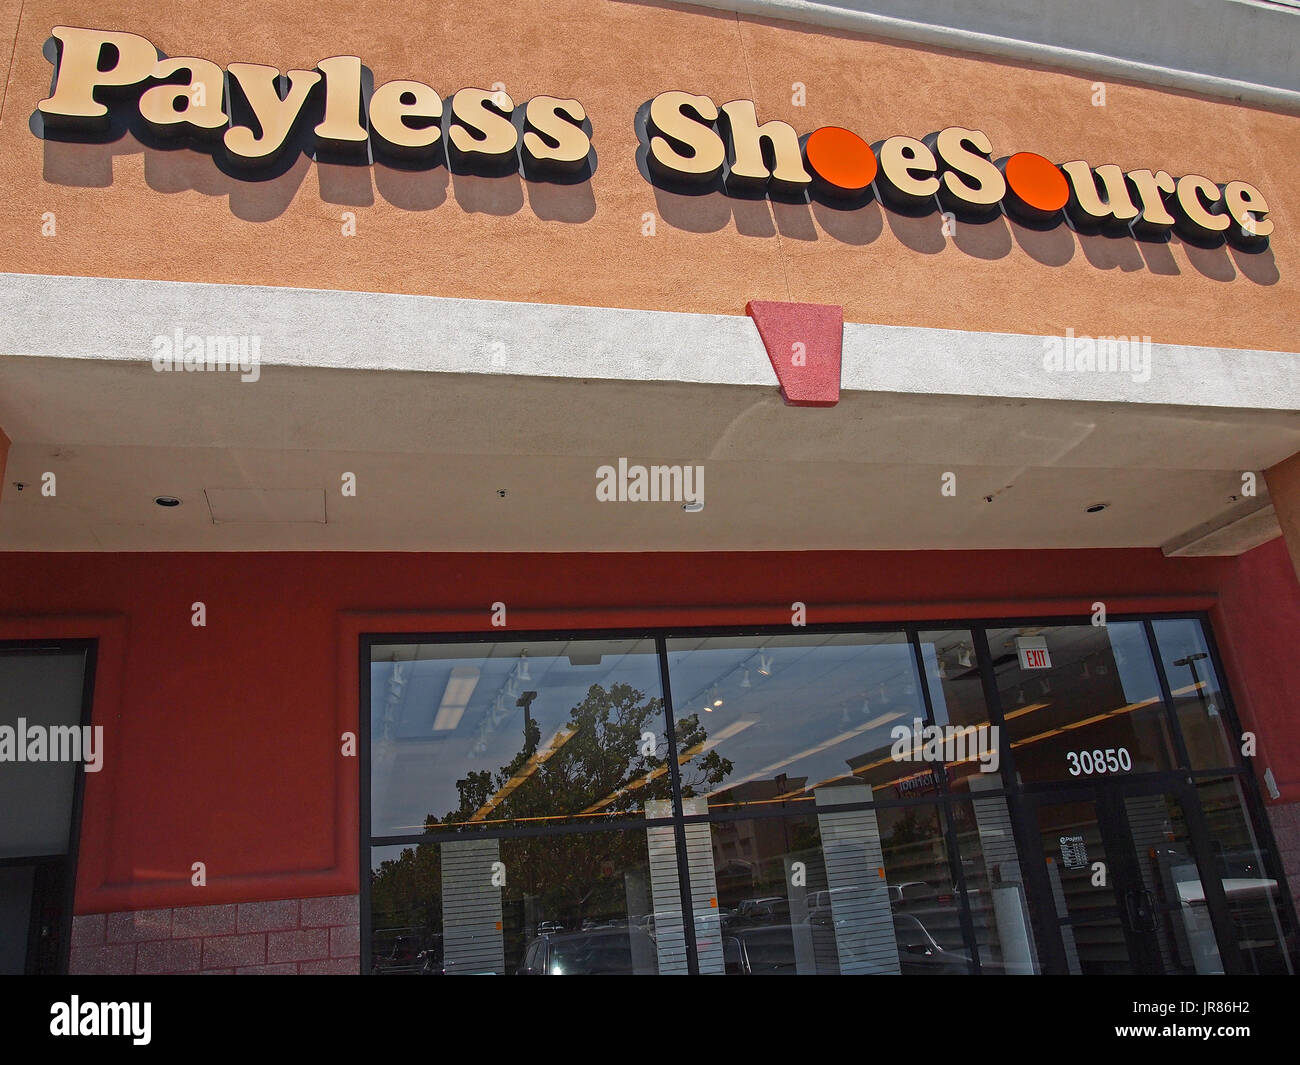 Payless Shoe Source store in California, USA Stock Photo